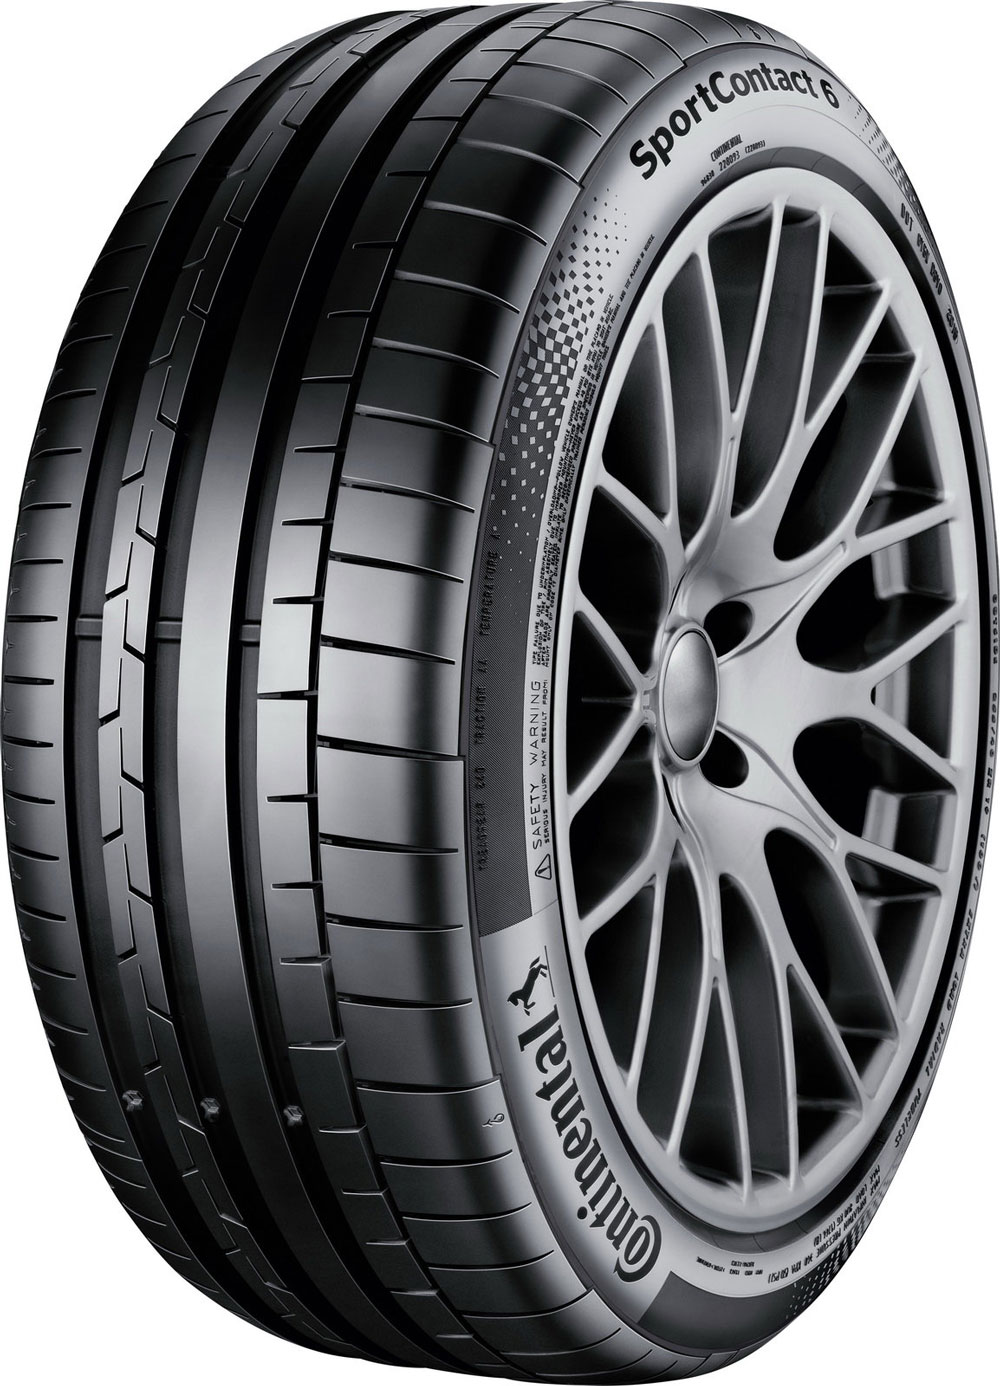 Гуми за кола CONTINENTAL SPORT CONTACT 6 XL 265/35 R19 98Y